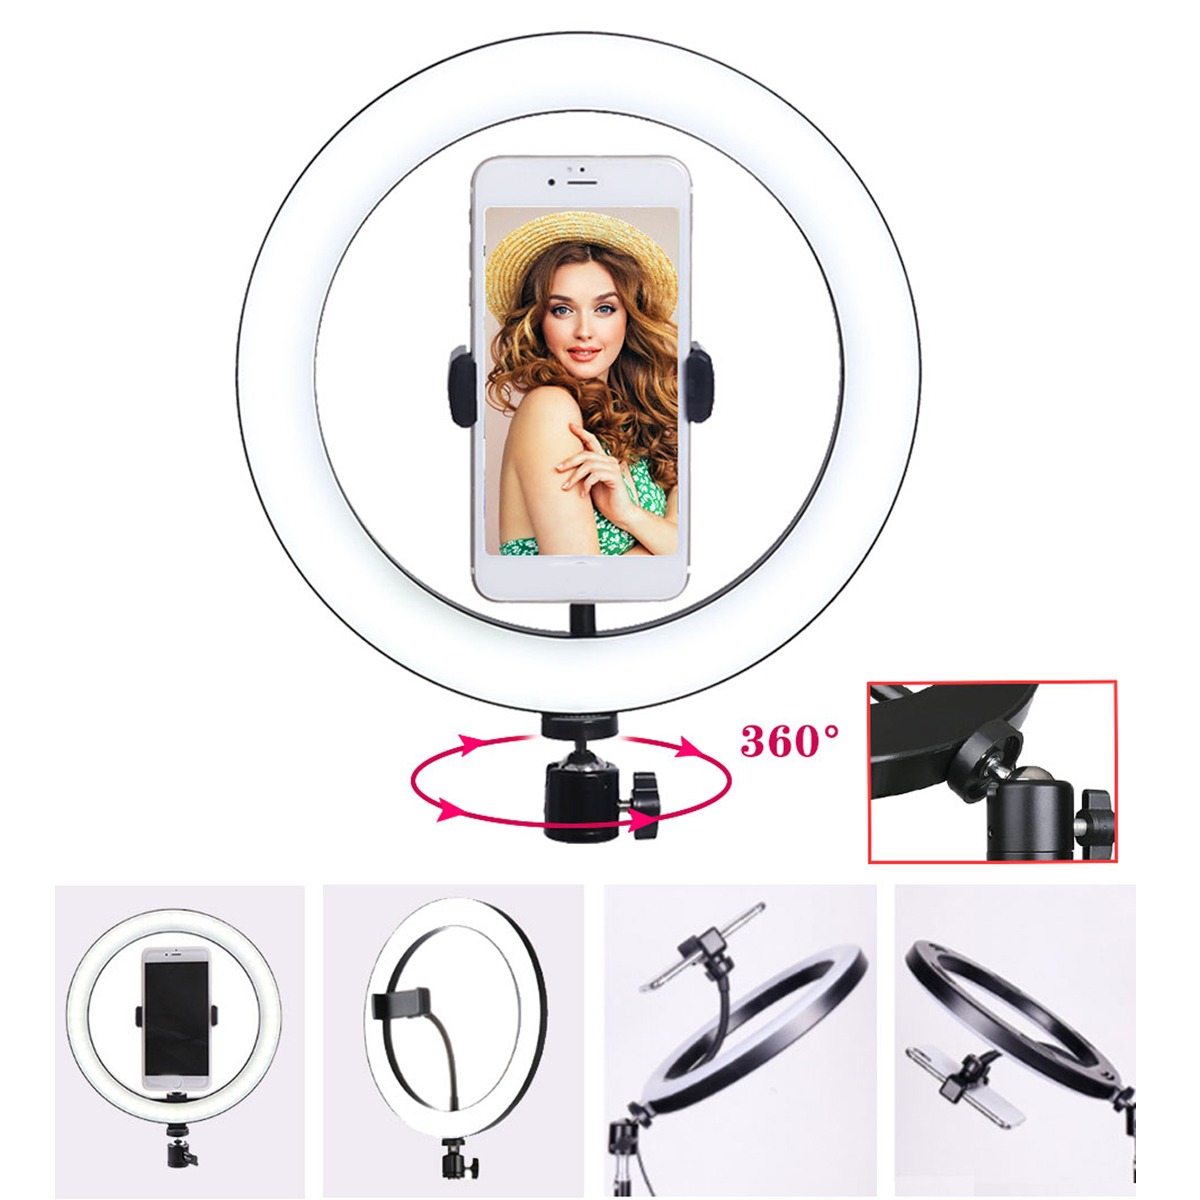 710131518-Inch-LED-Ring-Light-Studio-Fill-Light-Tripod-Stand-Photo-Makeup-Live-Dimmable-Lamp-for-You-1708205-3